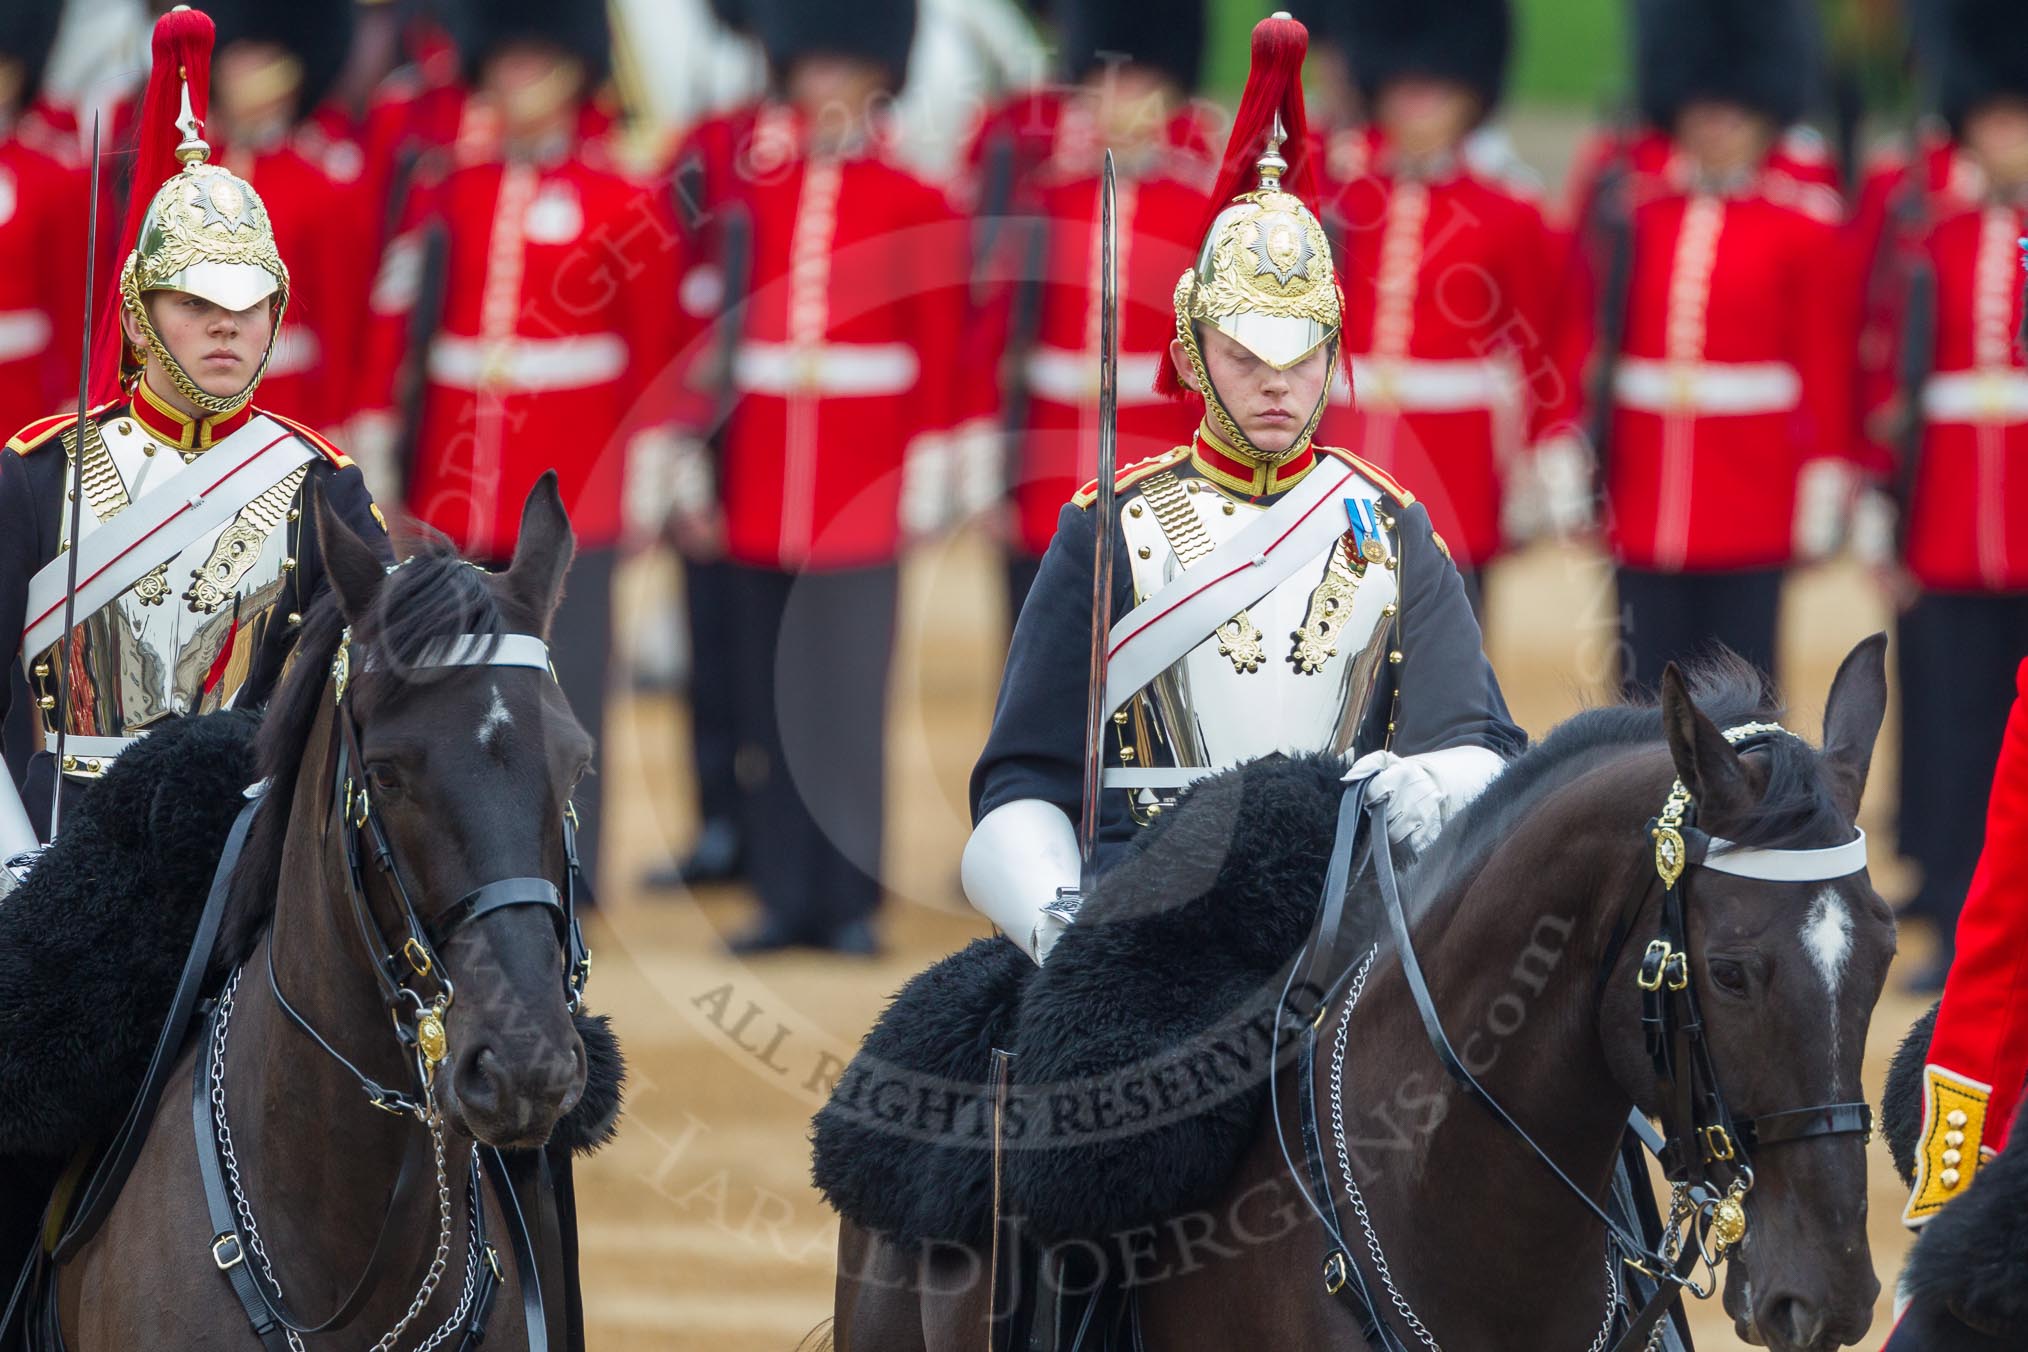 The Colonel's Review 2016.
Horse Guards Parade, Westminster,
London,

United Kingdom,
on 04 June 2016 at 11:05, image #202